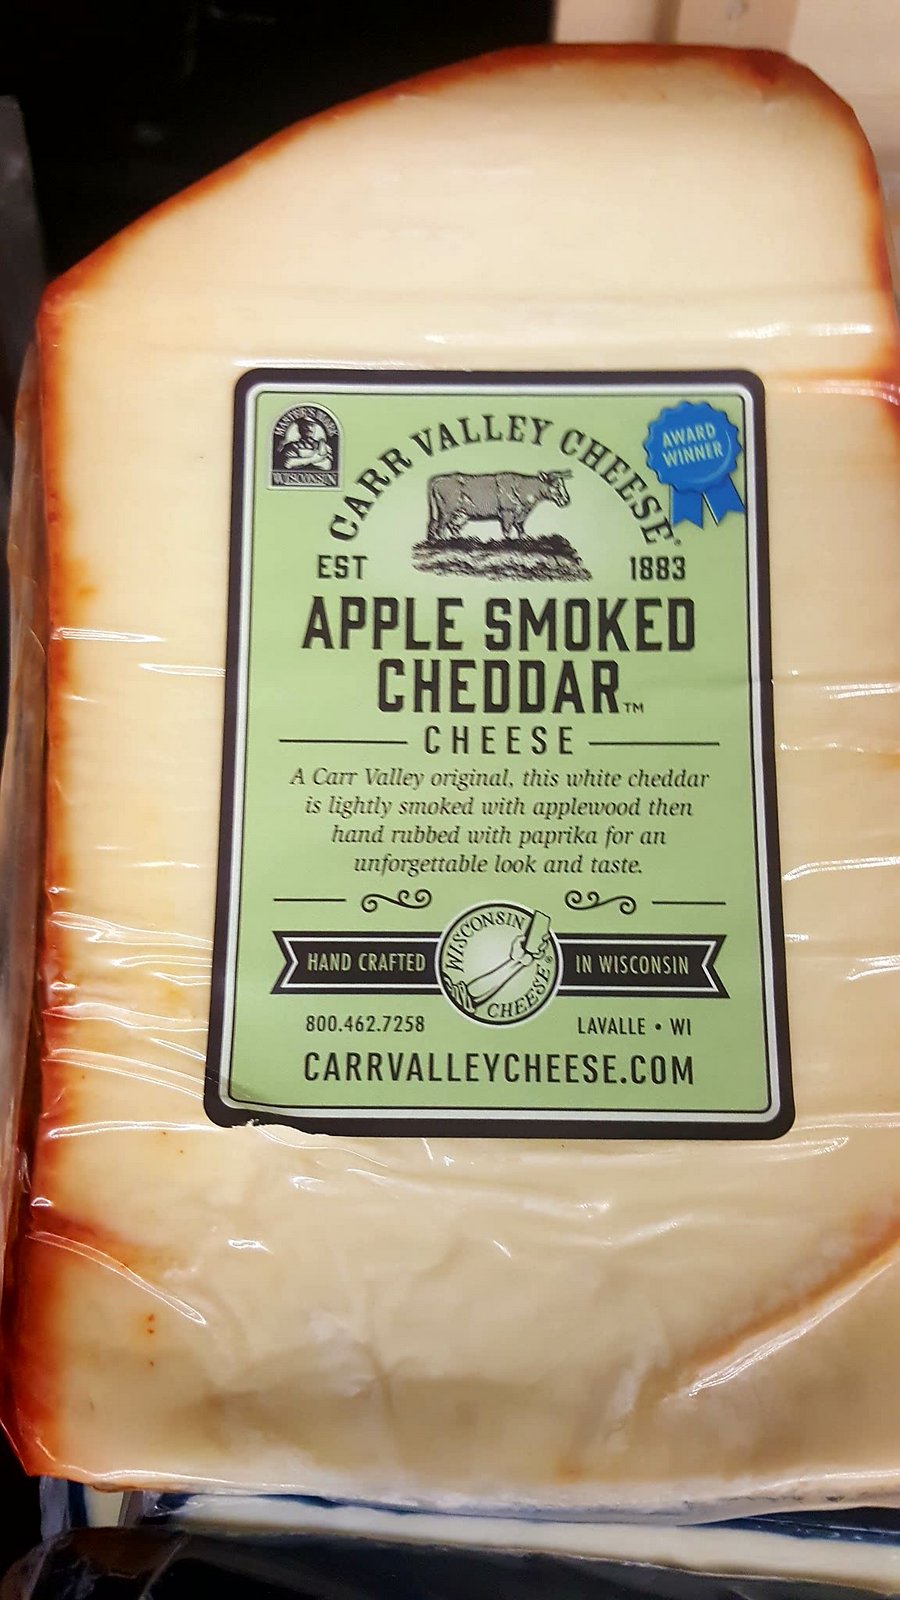 Oct 17 Carr Valley Apple Smoked Cheddar cheese.jpg